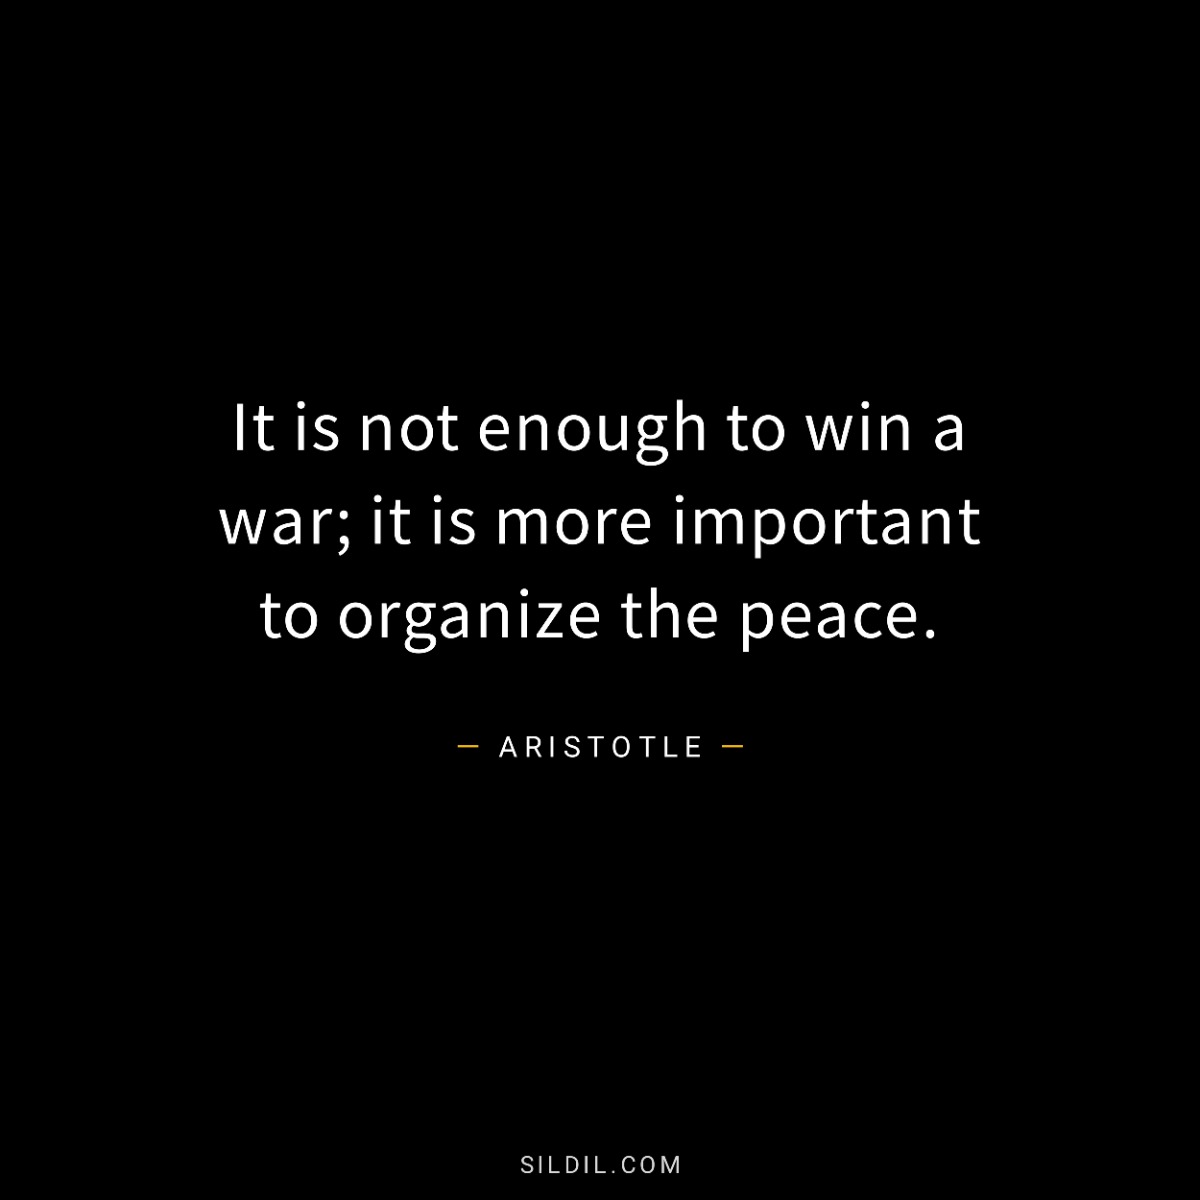 It is not enough to win a war; it is more important to organize the peace.